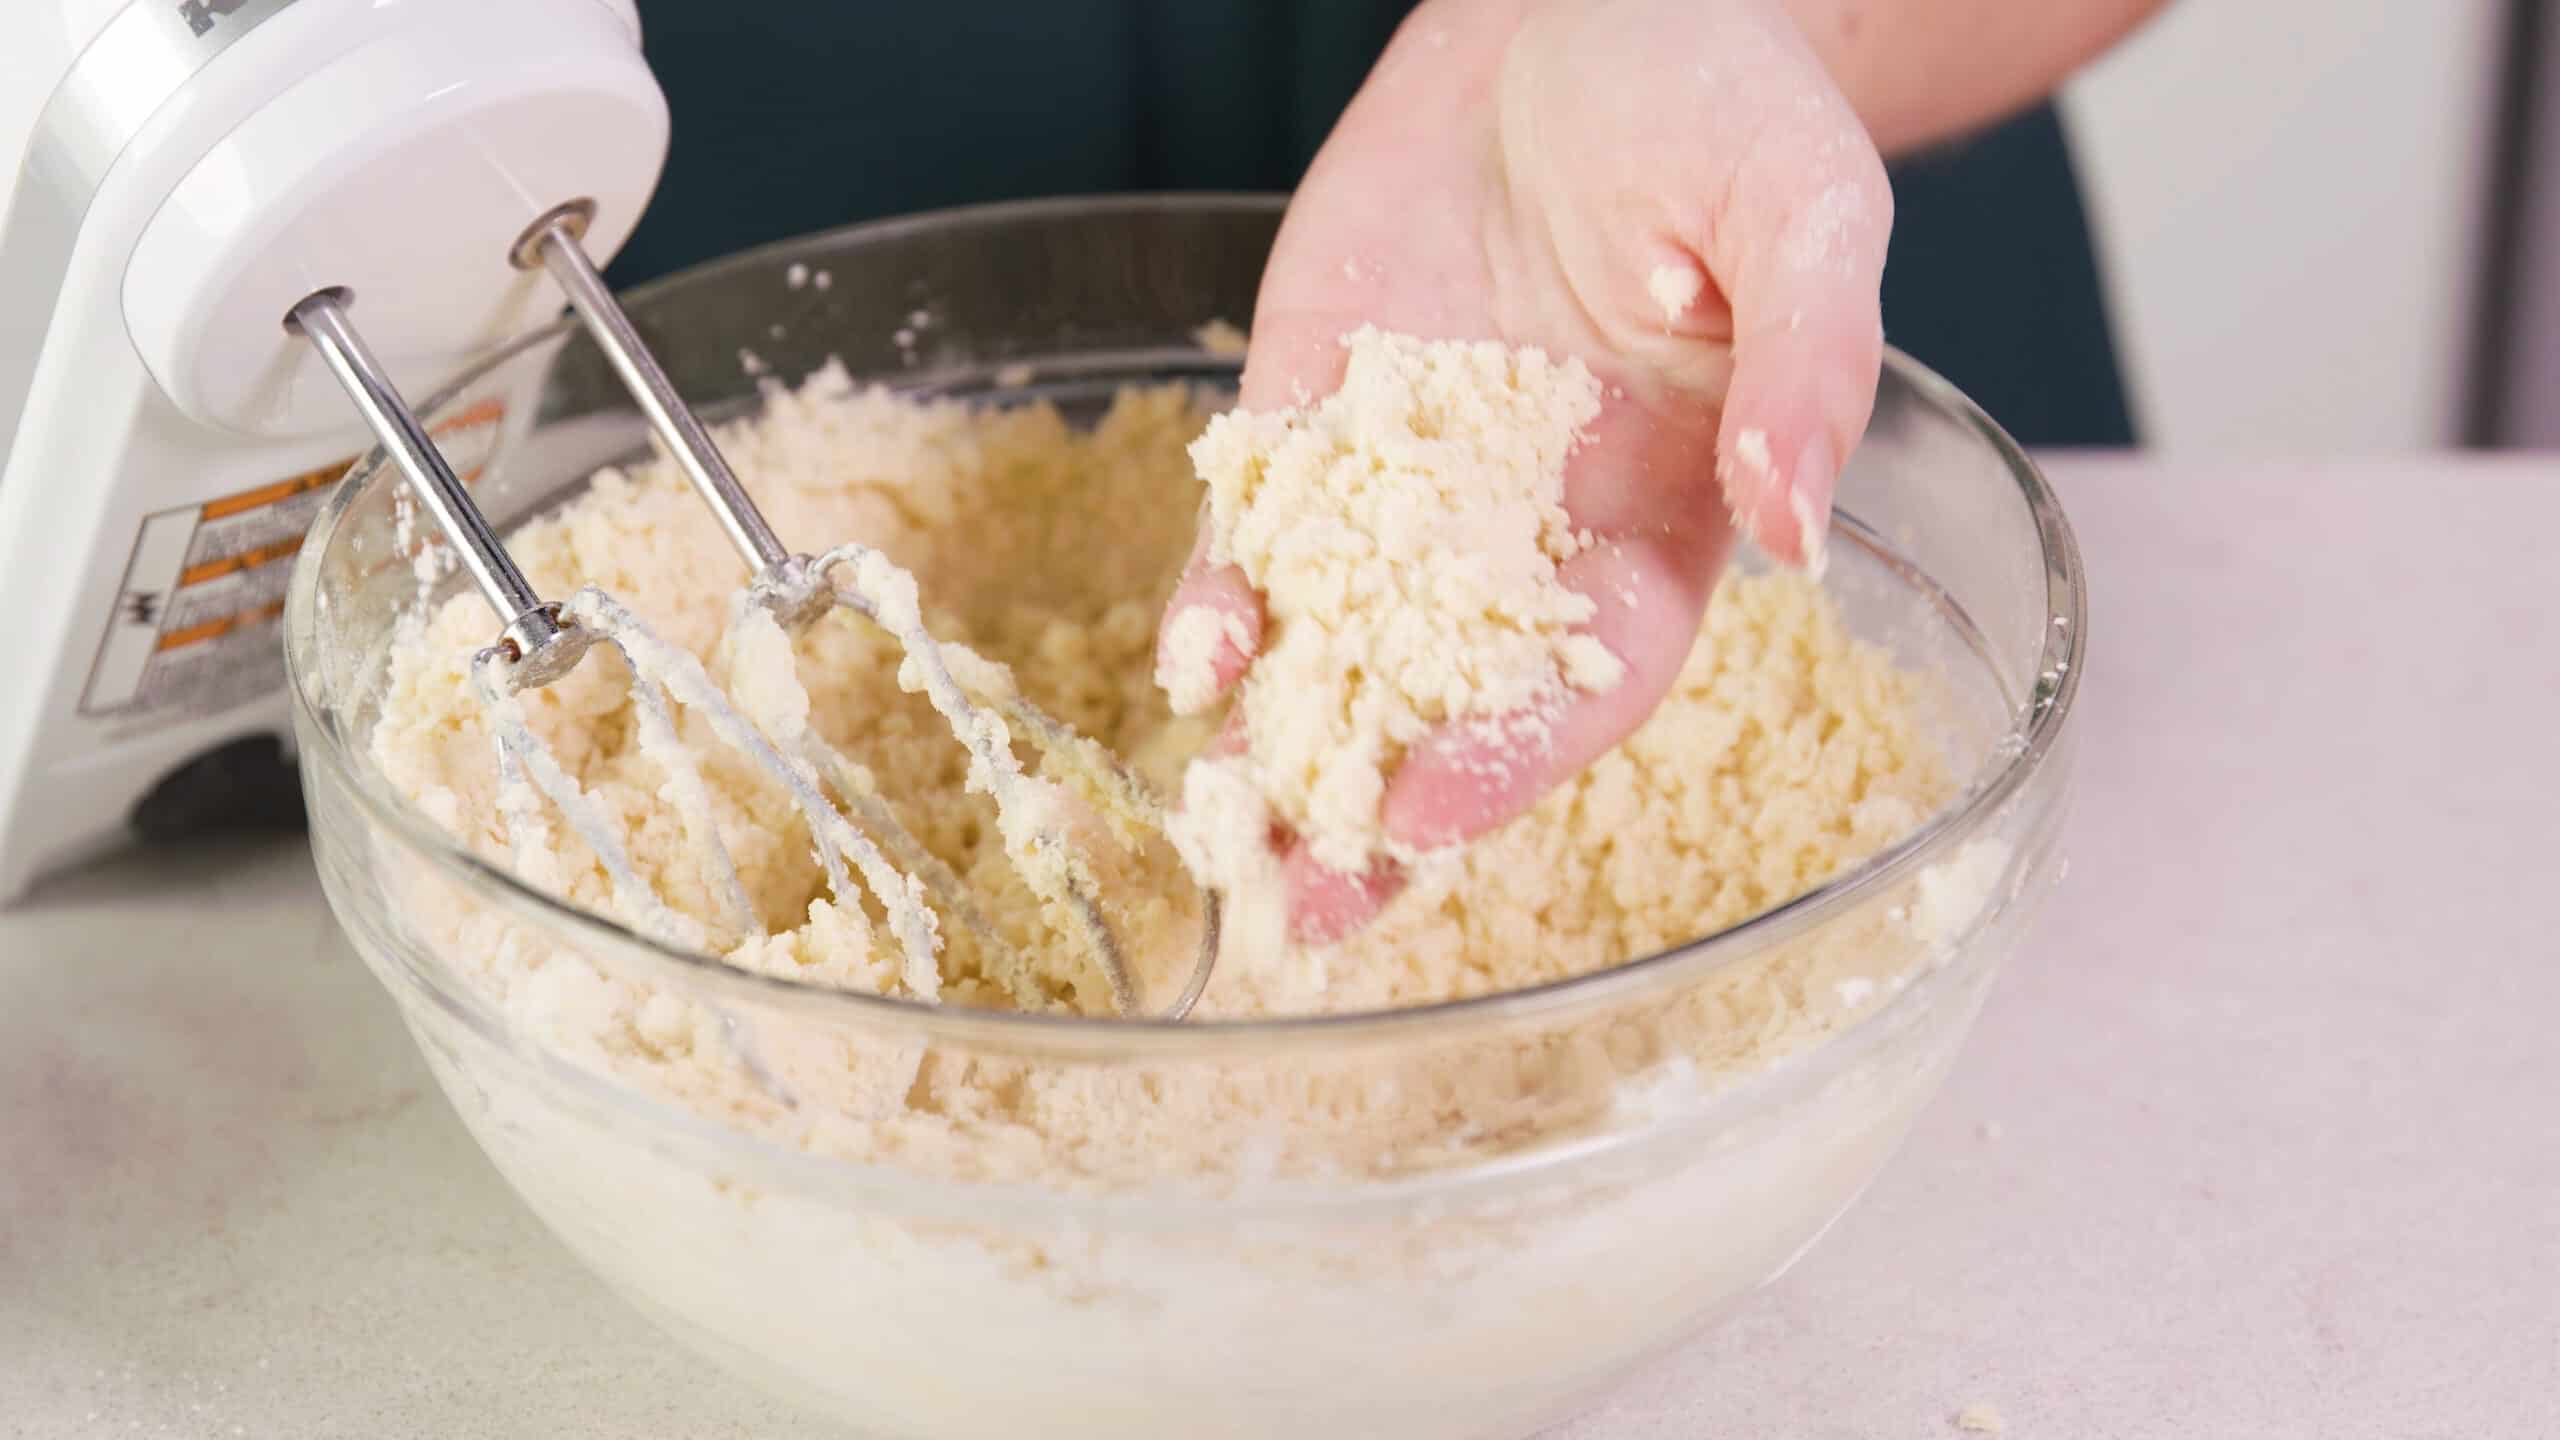 Close up view of large clear glass mixing bowl filled with cookie batter and a hand filled with batter to show a sand-like texture with a hand mixer leaning into the bowl with metal beaters.